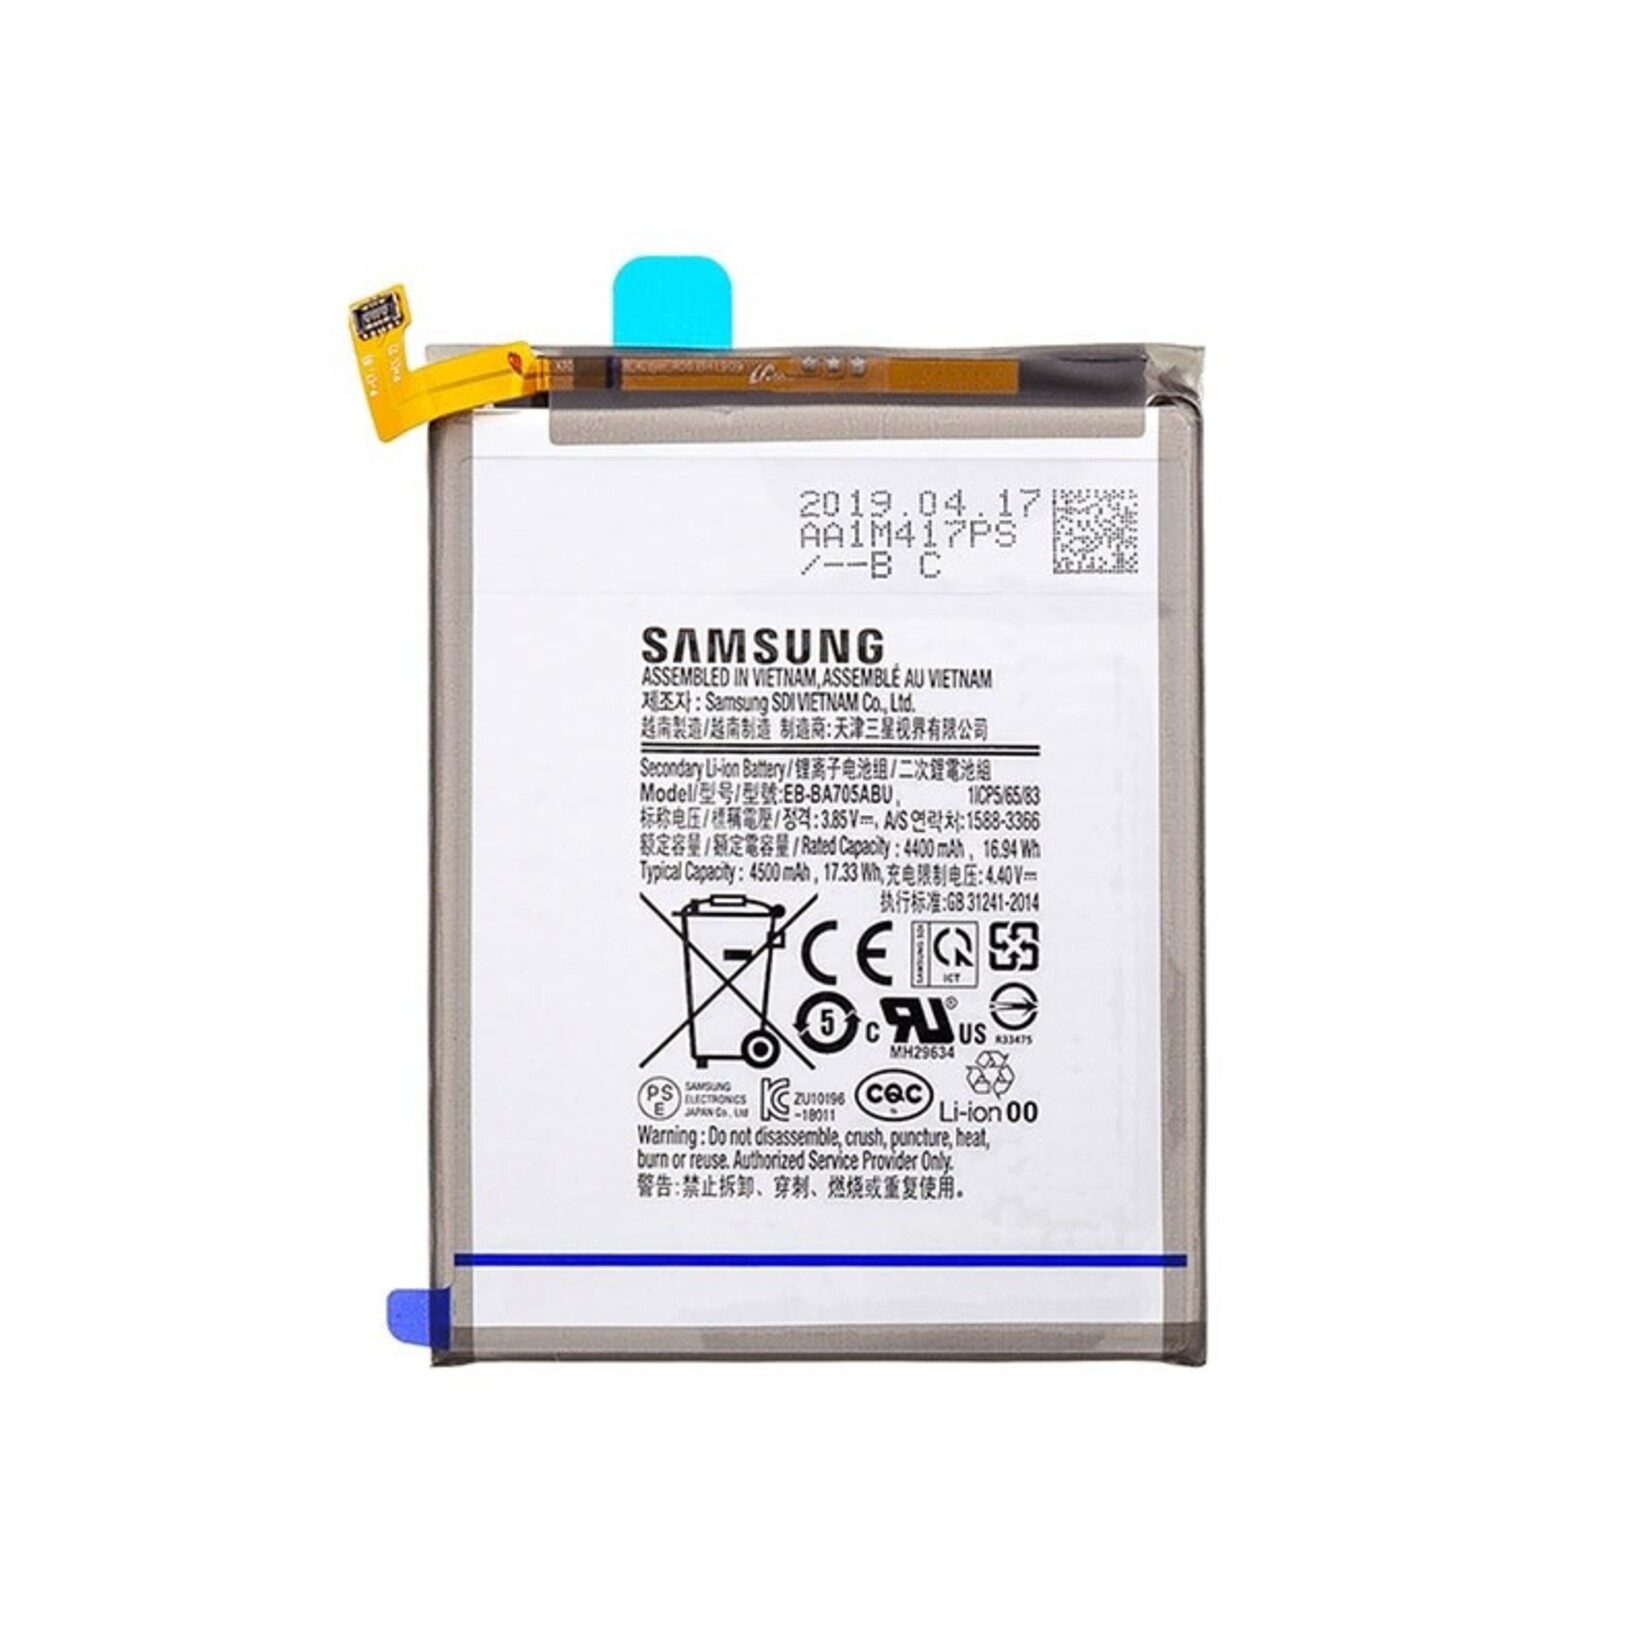 Samsung REPLACEMENT BATTERY SAMSUNG GALAXY A70 2019